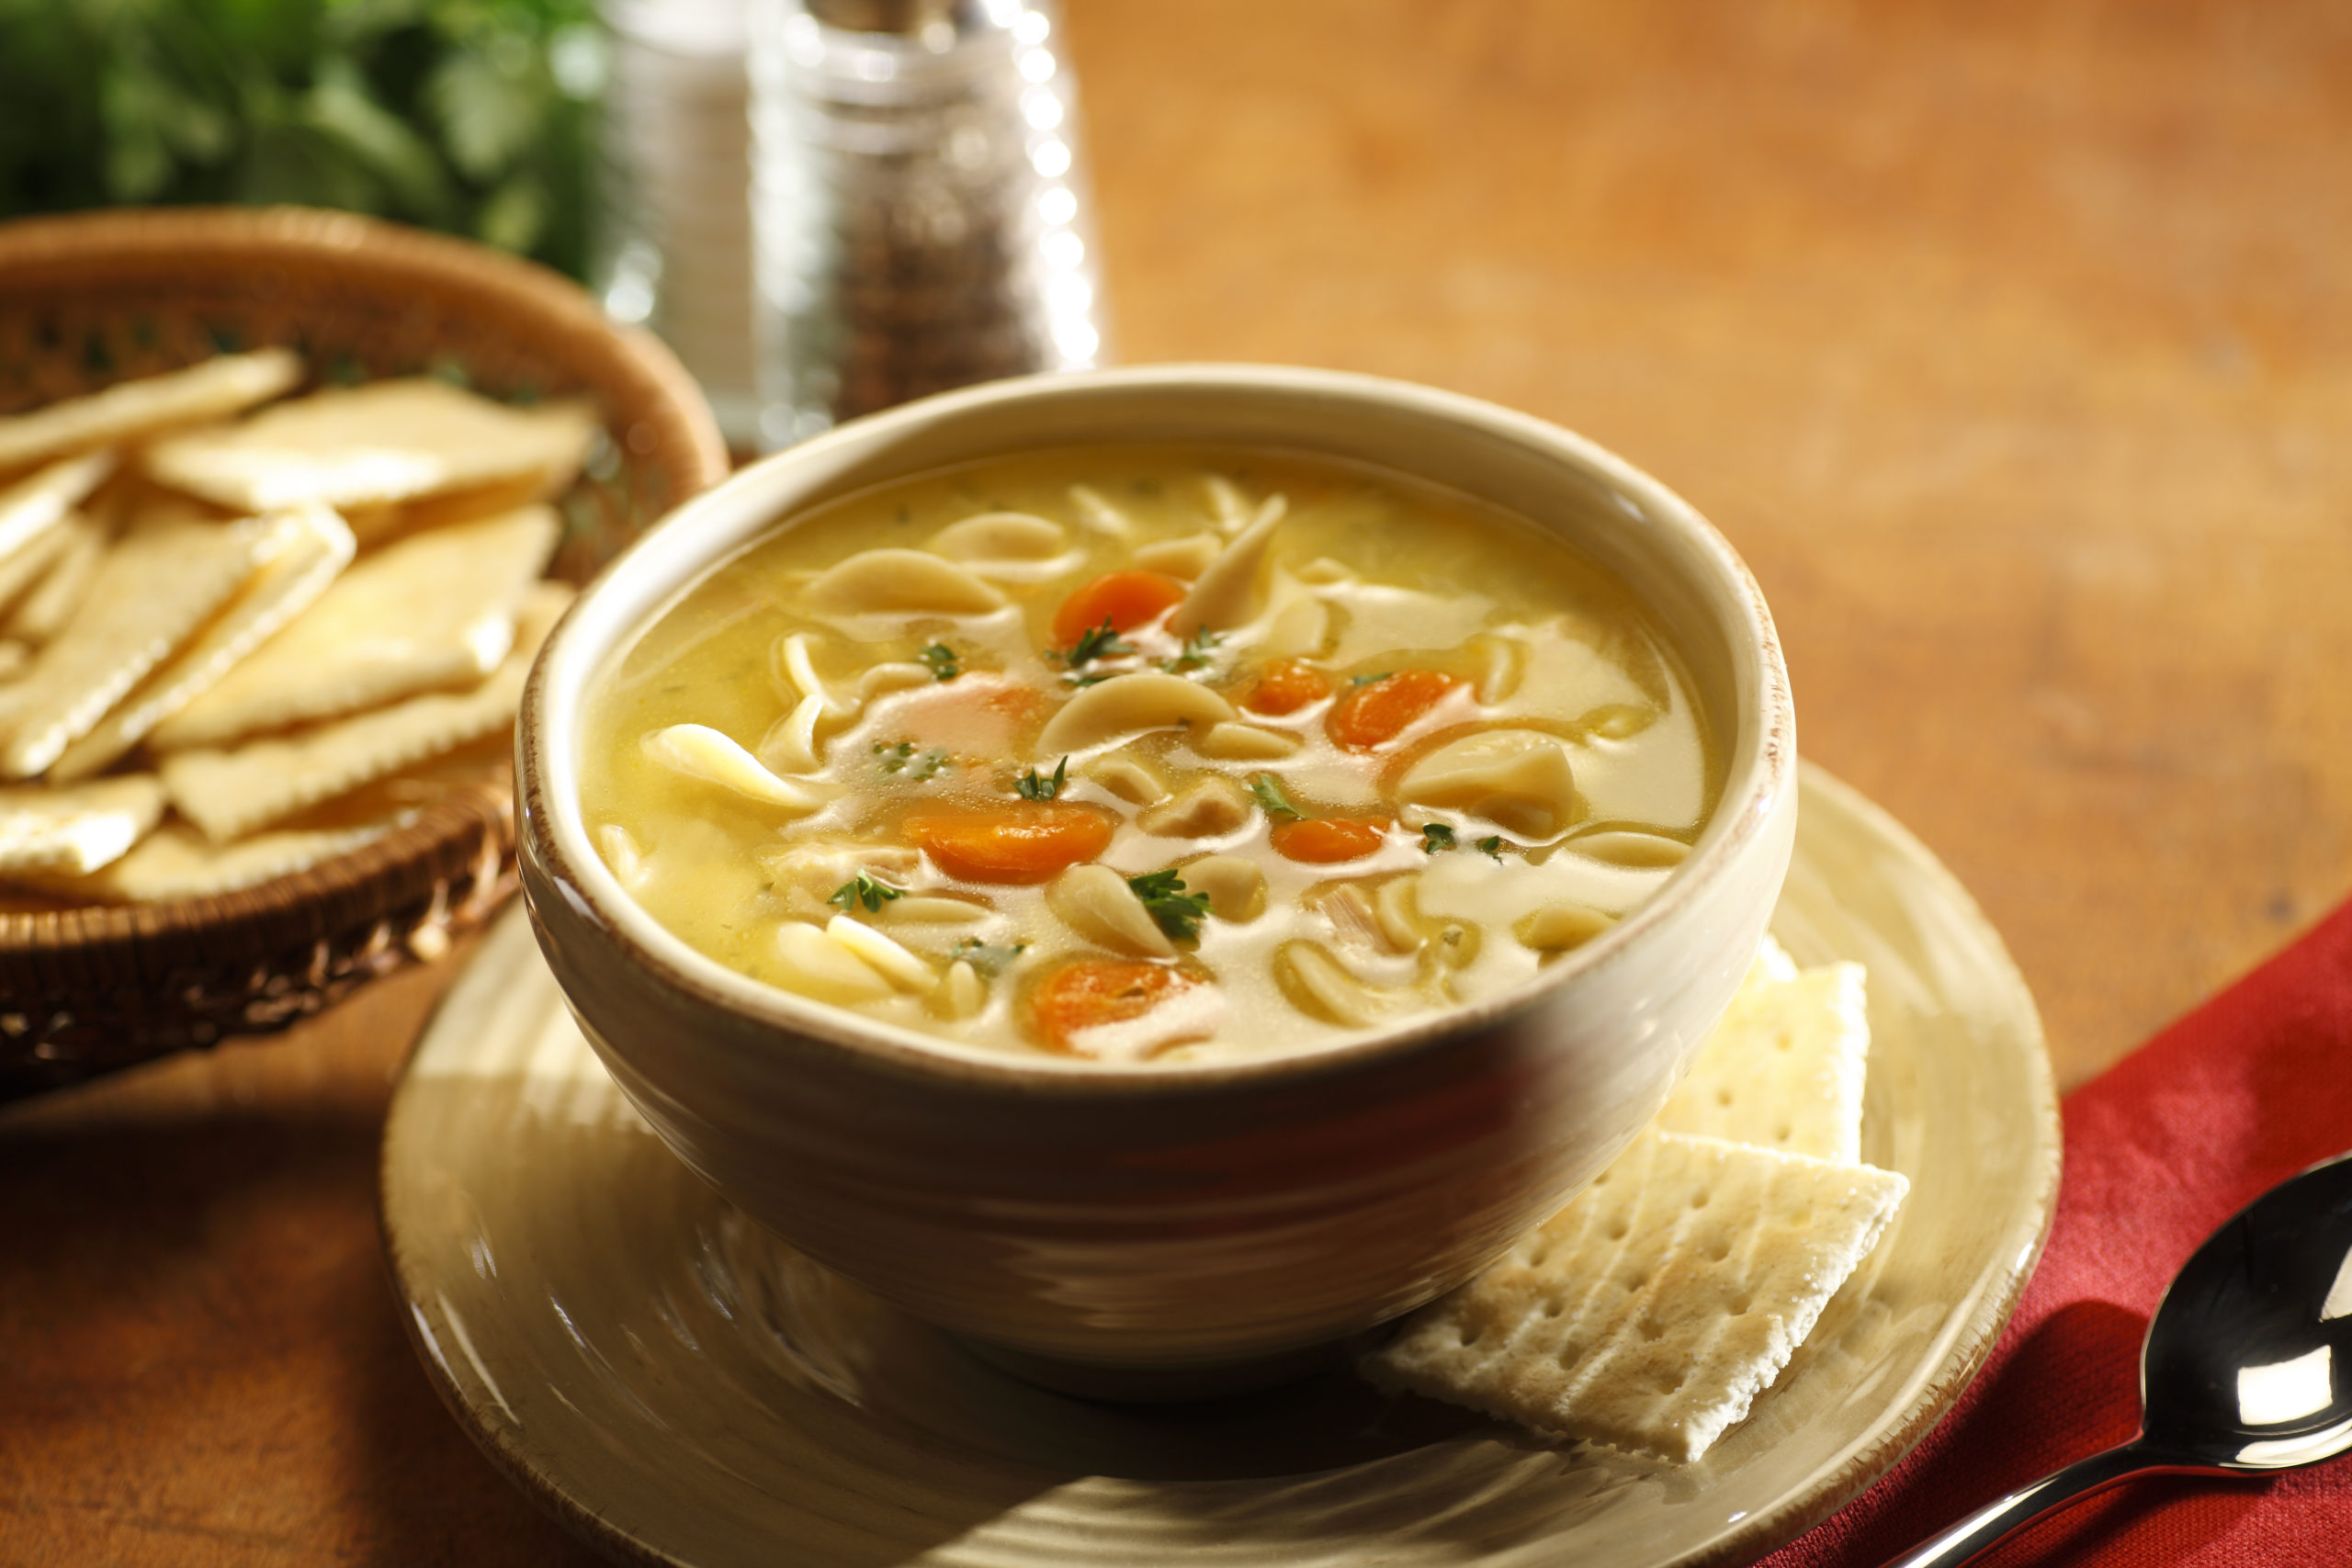 <h1 class="tribe-events-single-event-title">Lamoni United Methodist Church Chicken Noodle Dinner</h1>